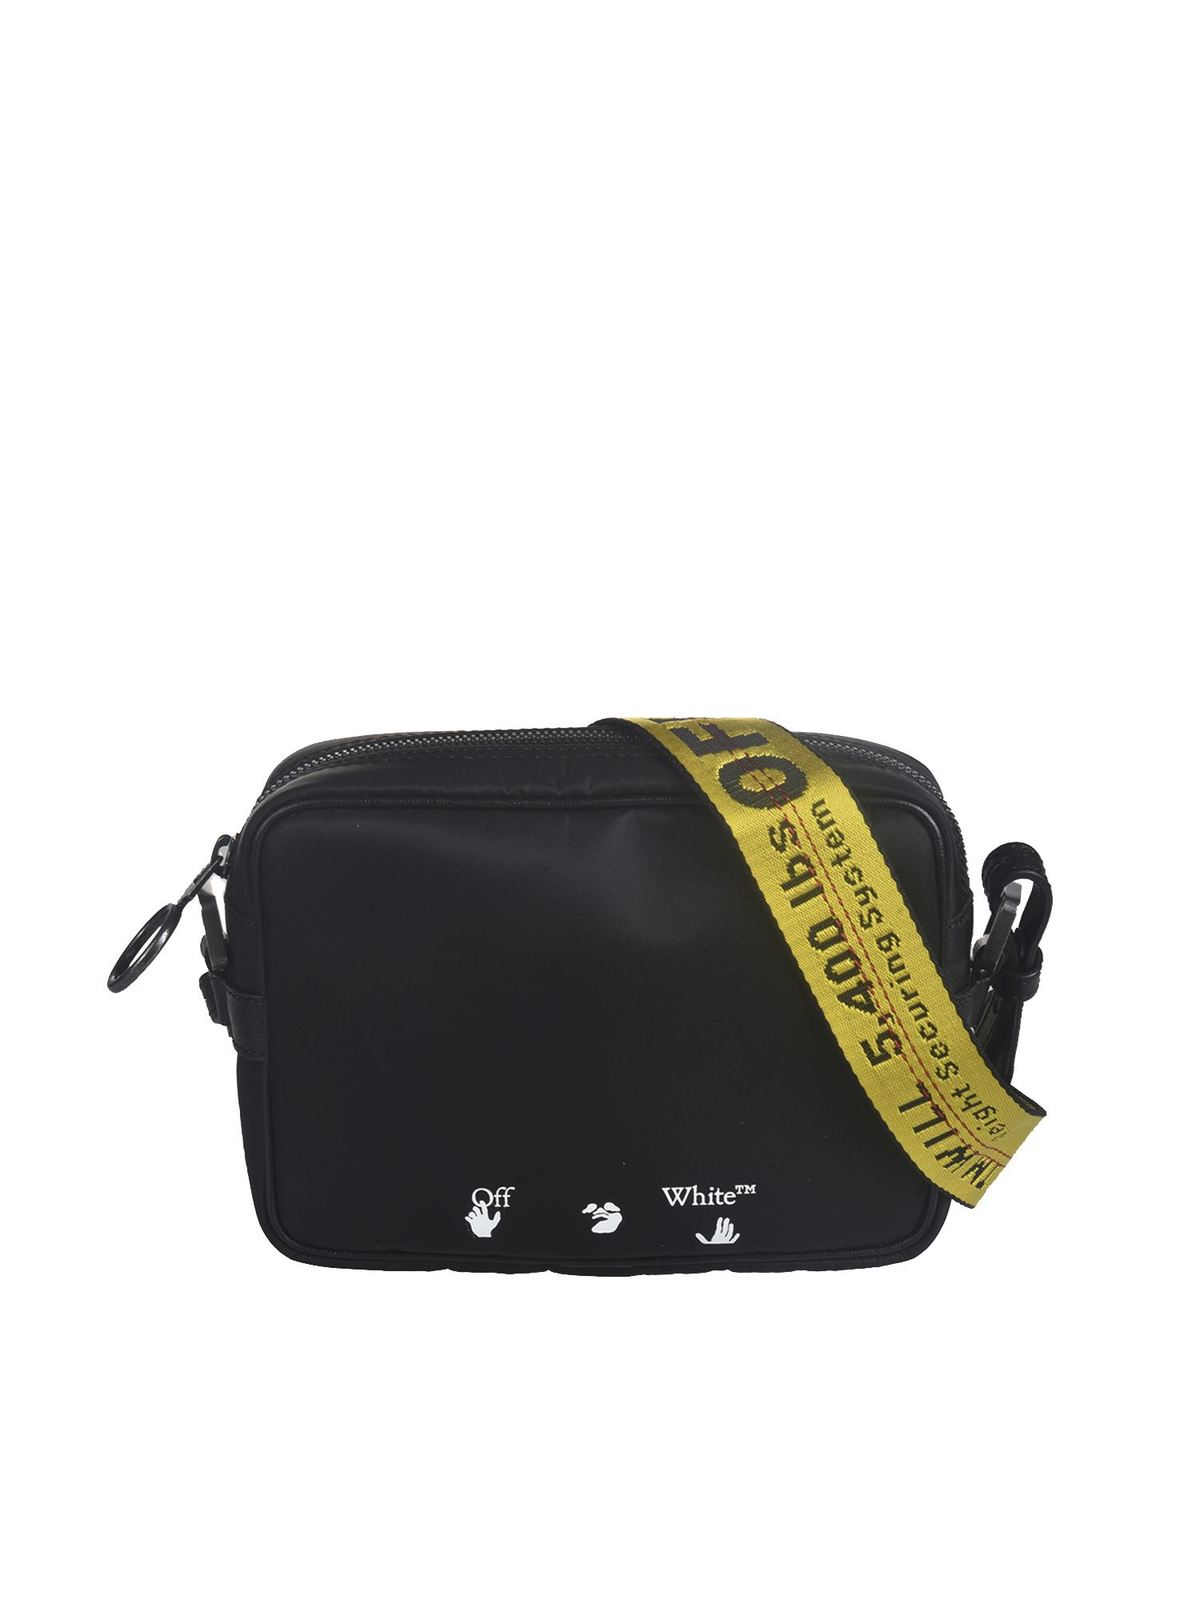 Cross body bags Off-White - Bag in black with Industrial shoulder